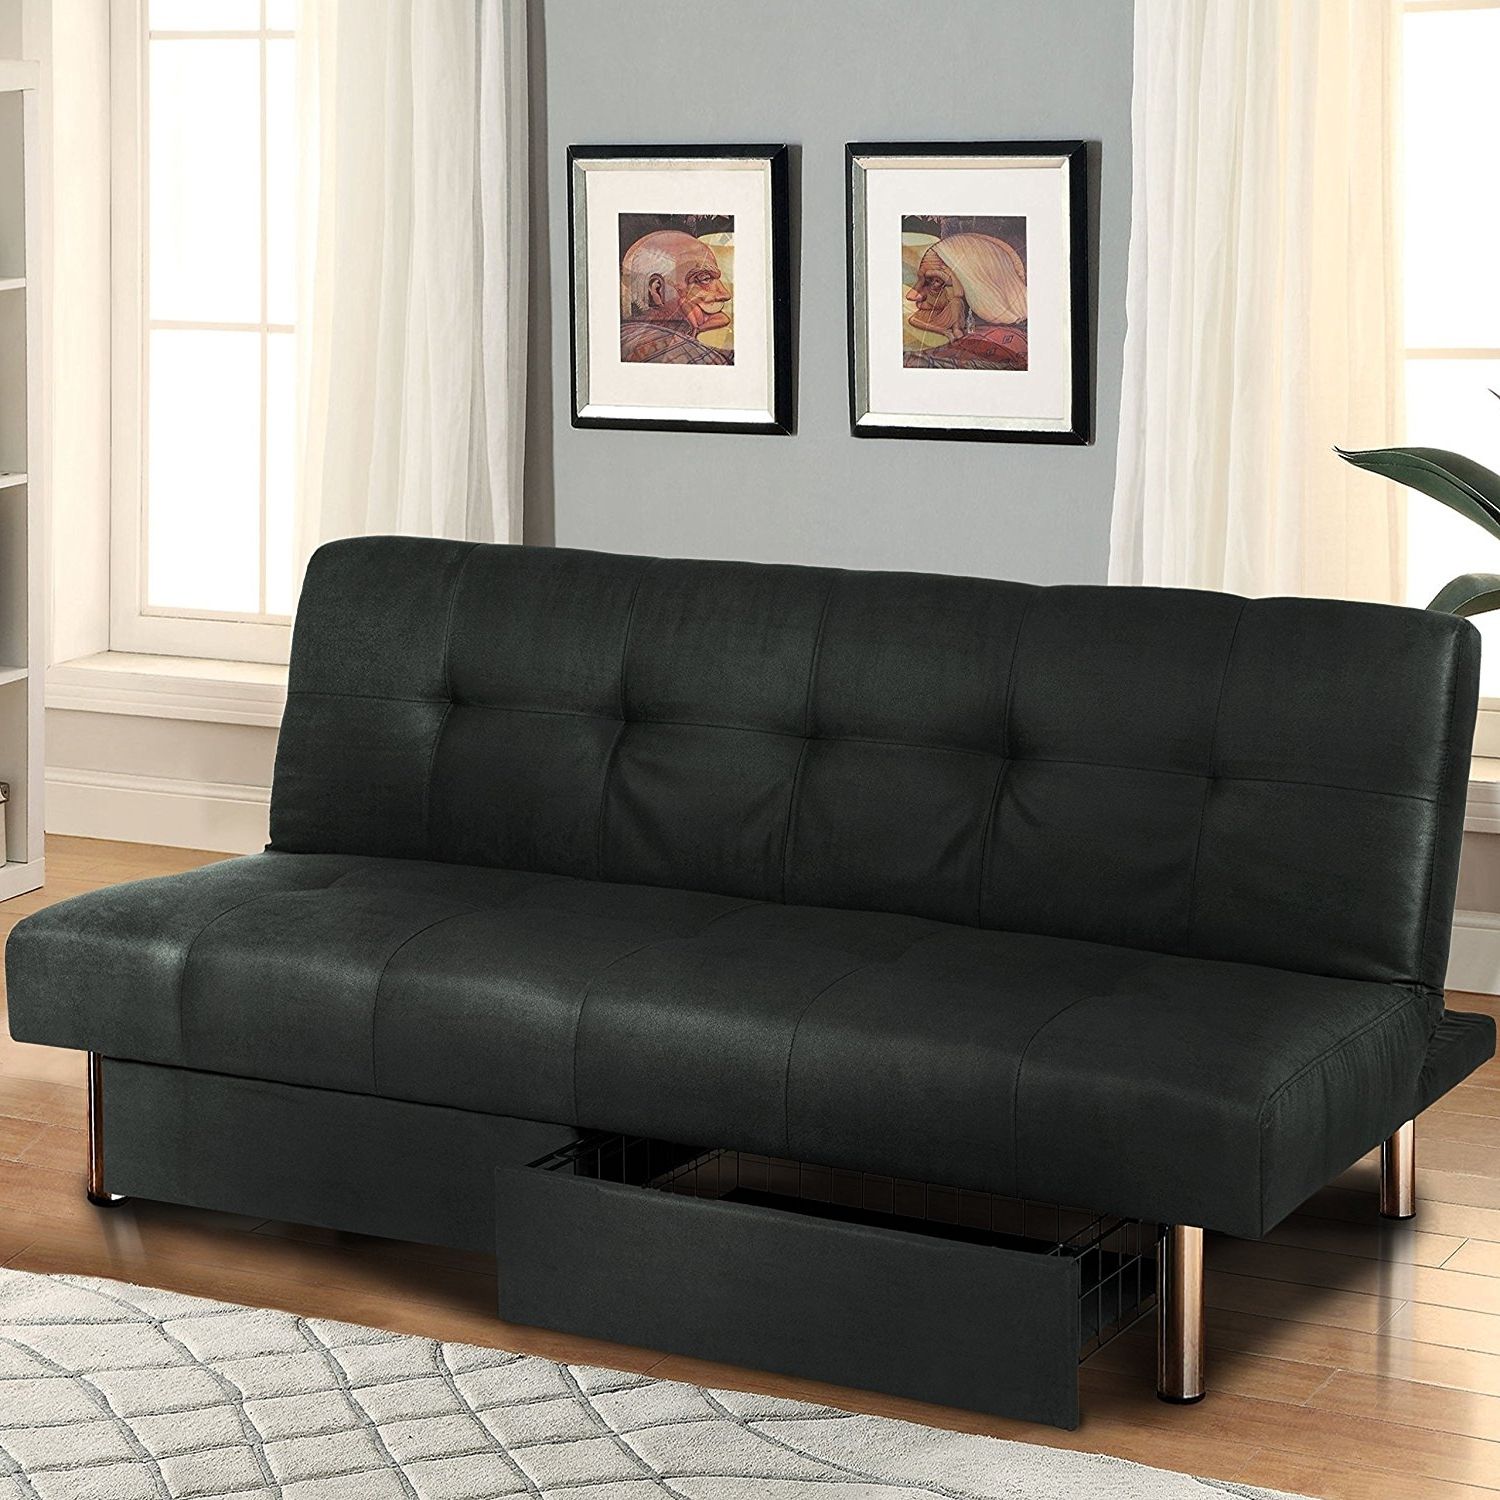 Jennifer Convertibles Sectional Sofas For Famous Sofa : Klik Klak Convertible Sleeper Sofa Jennifer Convertible (View 16 of 20)